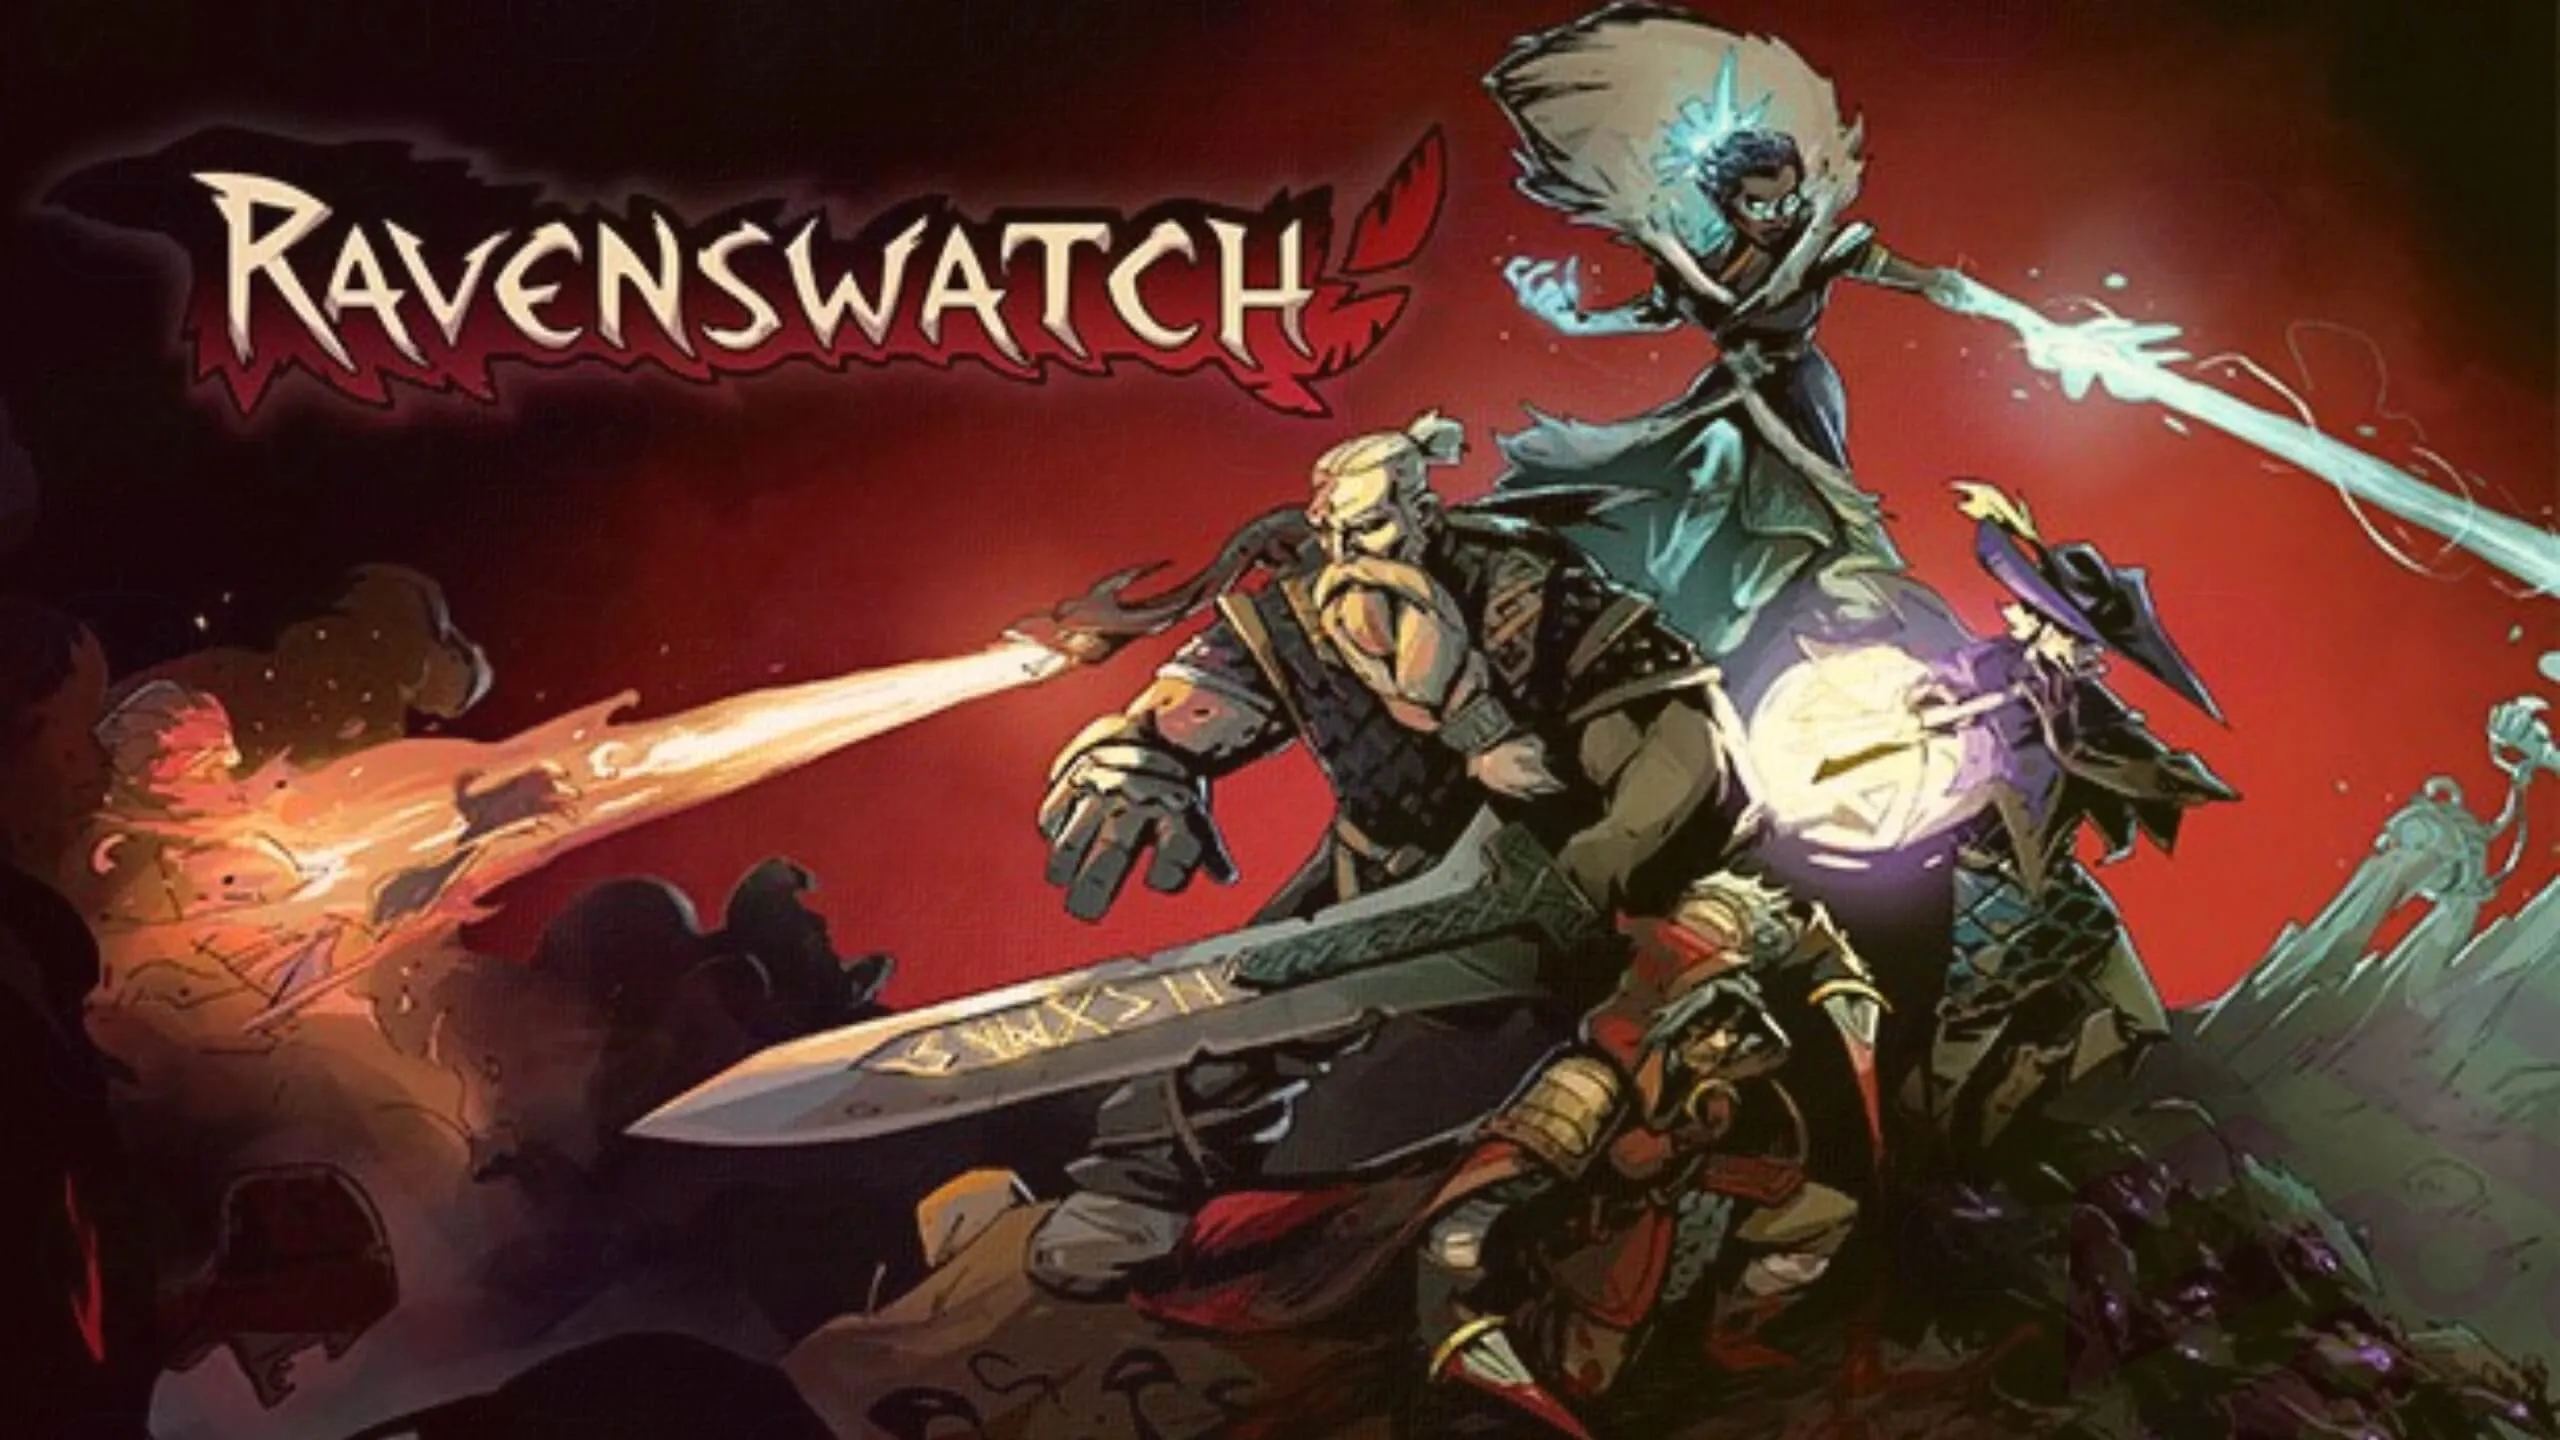 Ravenswatch logo and characters